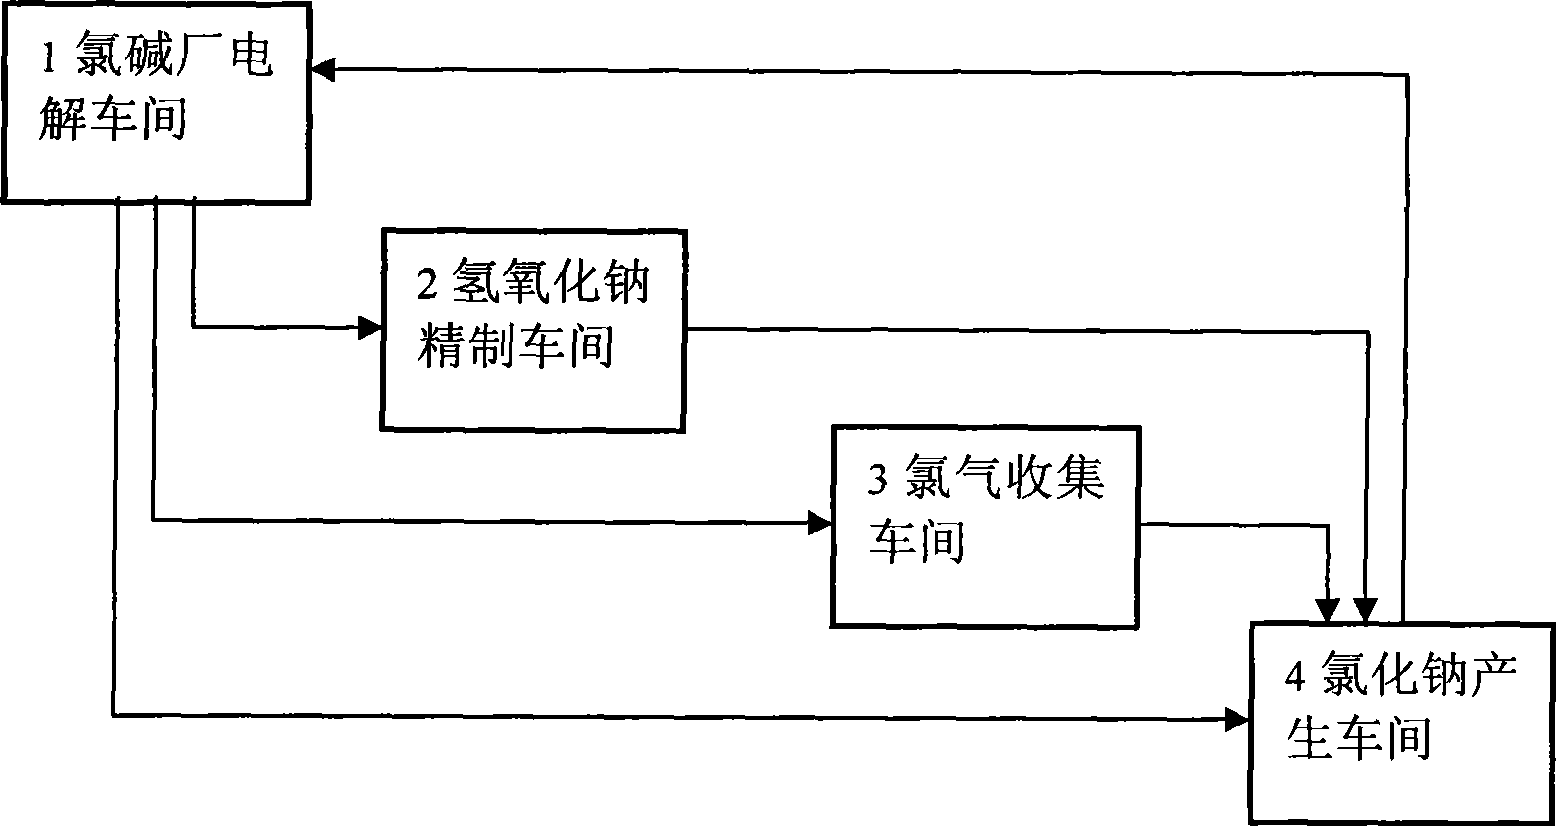 Material circulation system formed by waste carbide mud residue and alkali-chloride industry